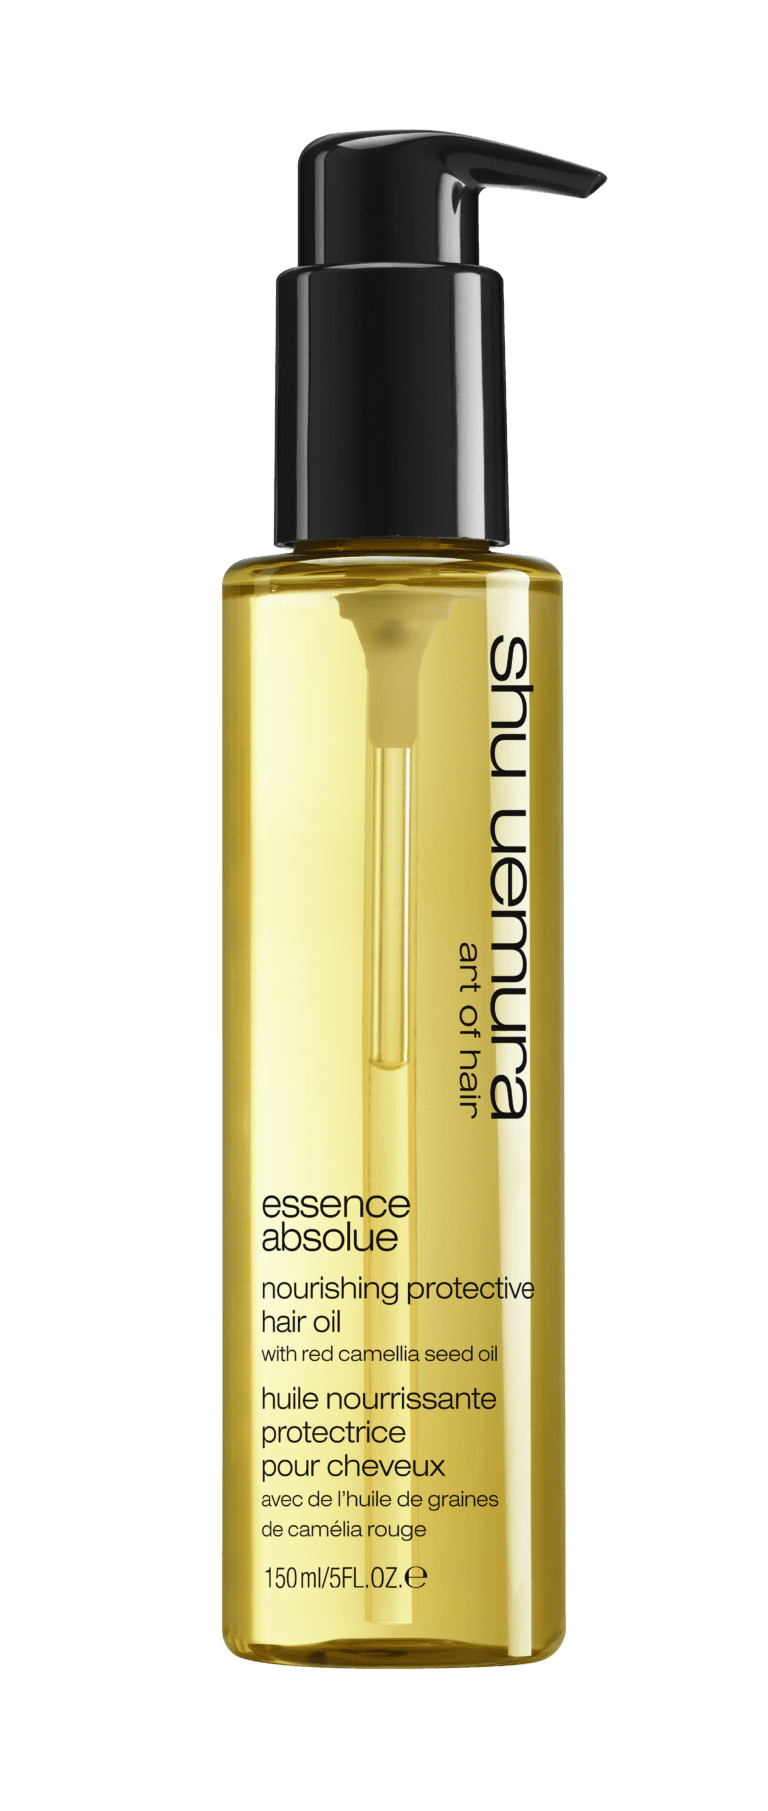 Image - Huile nourrissante protectrice Essence Absolue